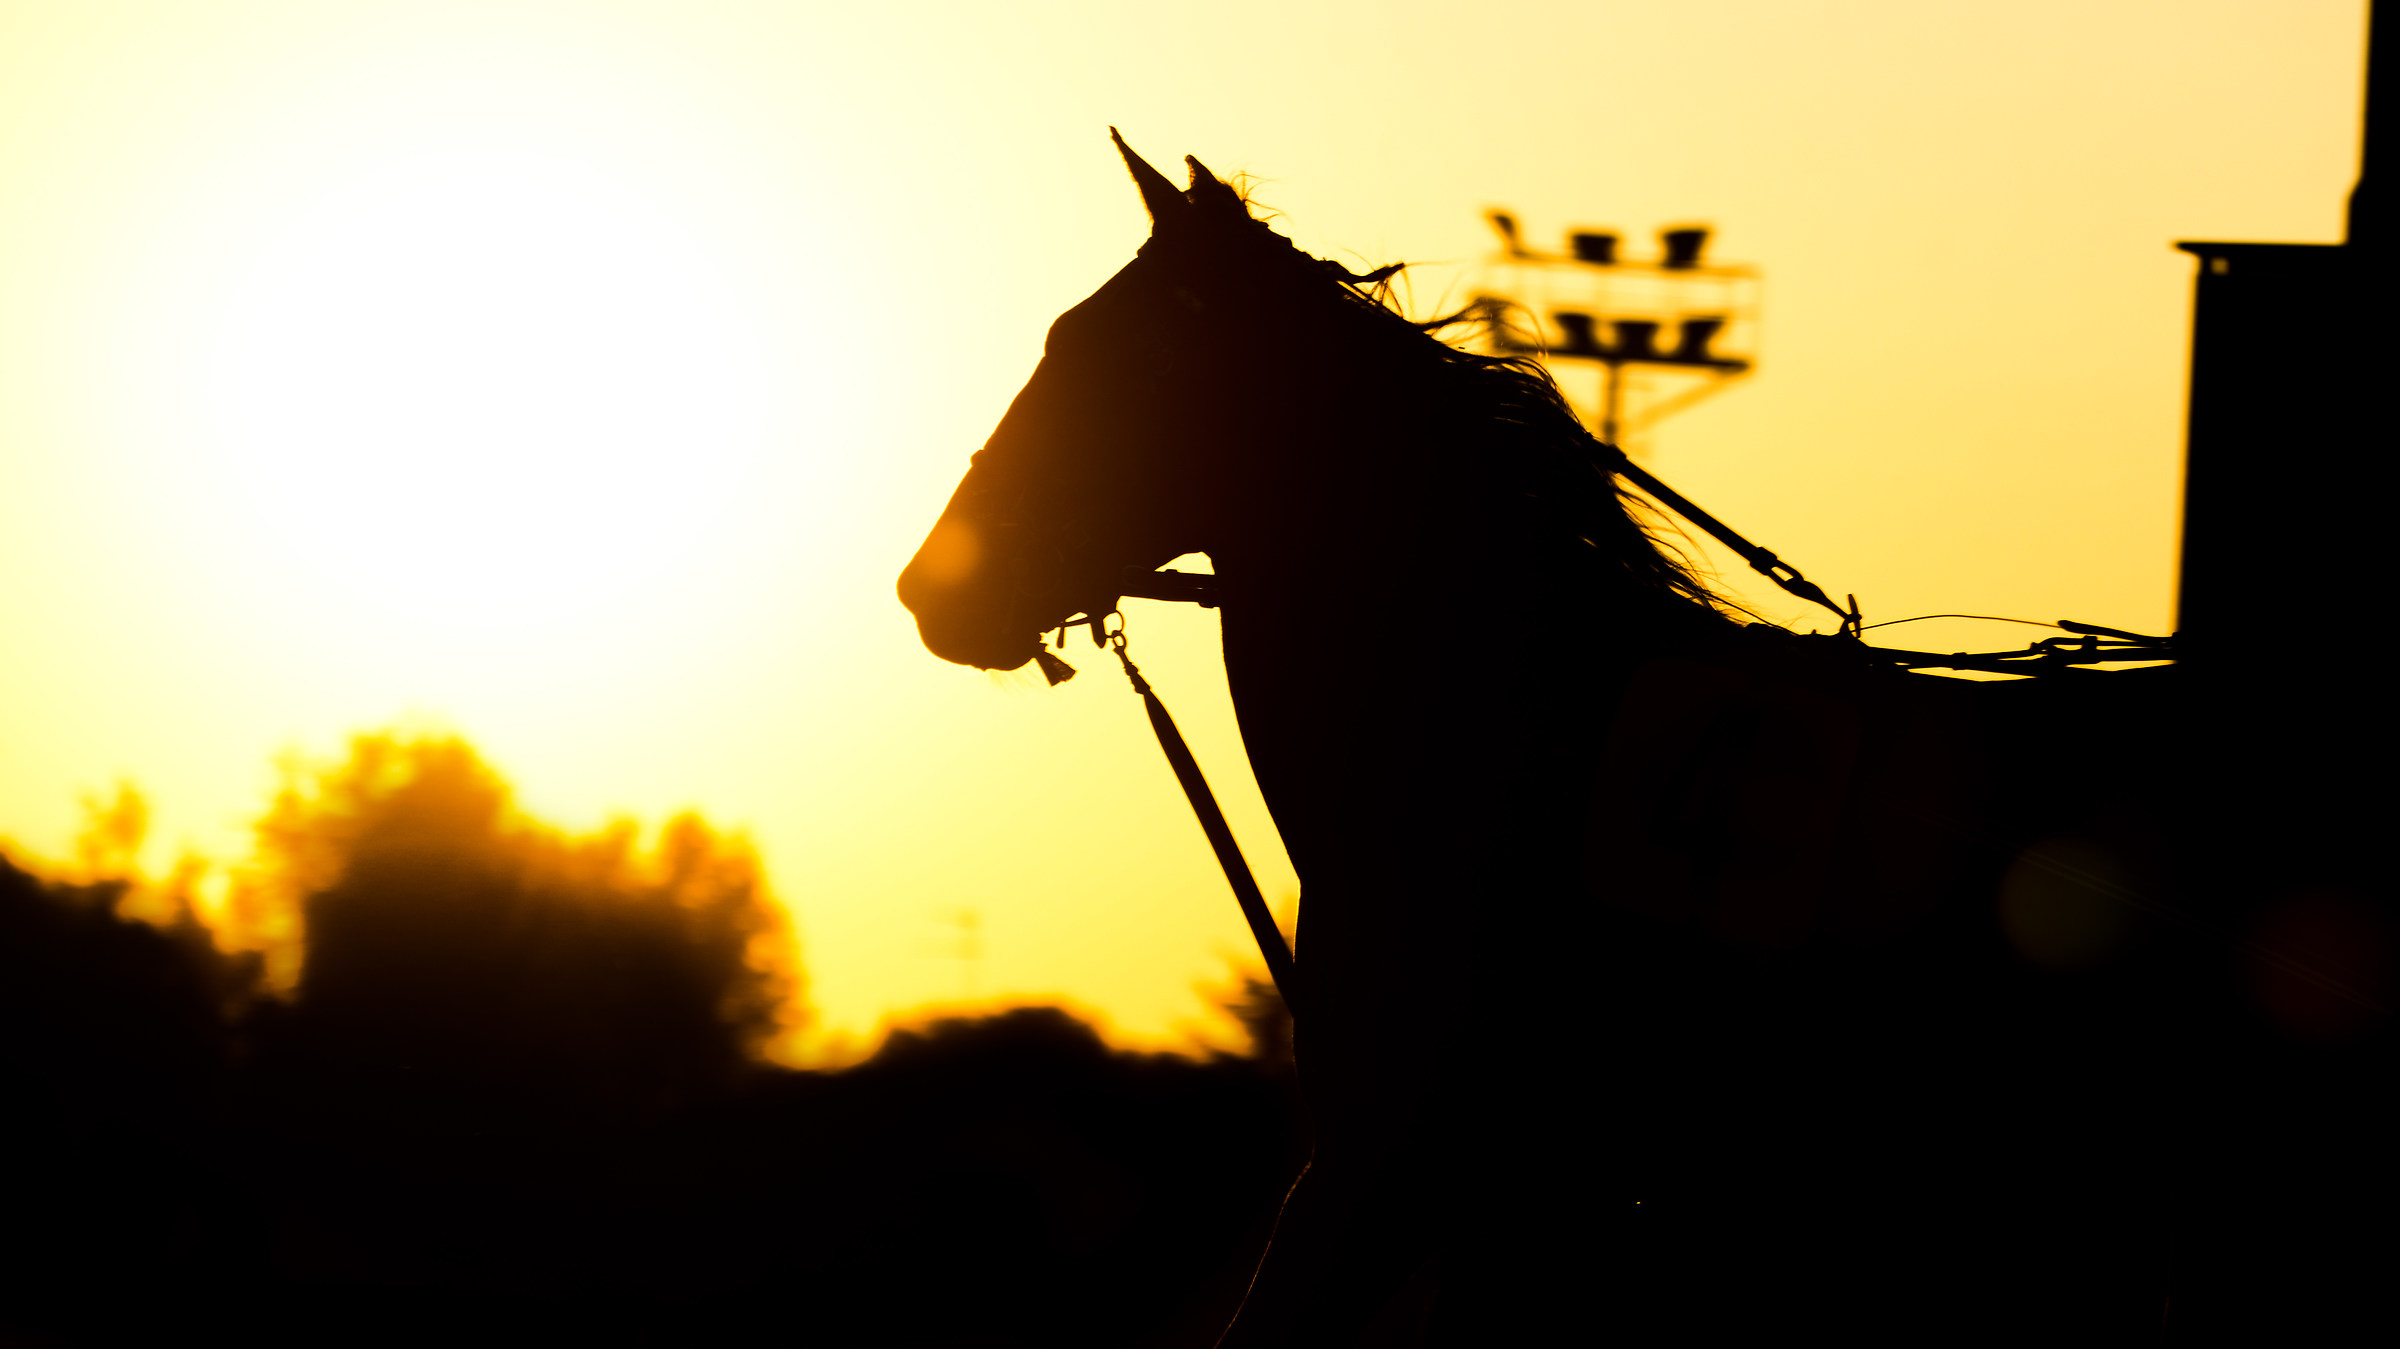 Horse Racing in silhouette...